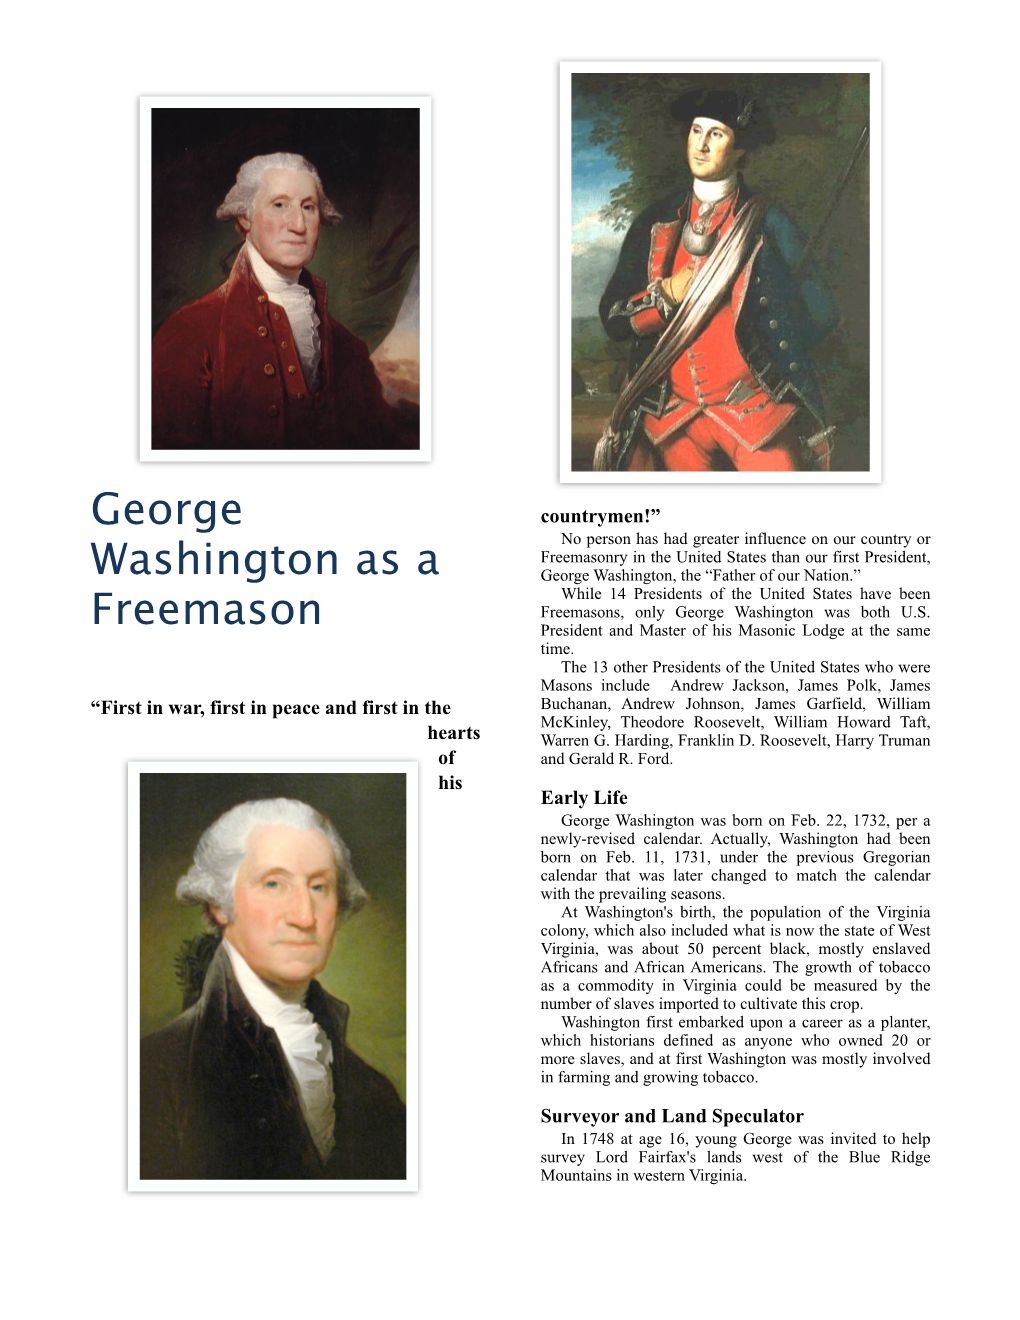 George Washington As a Freemason” Is Based on a November 2010 Presentation by Brother Rob Chandler of the Sunnyside Lodge No